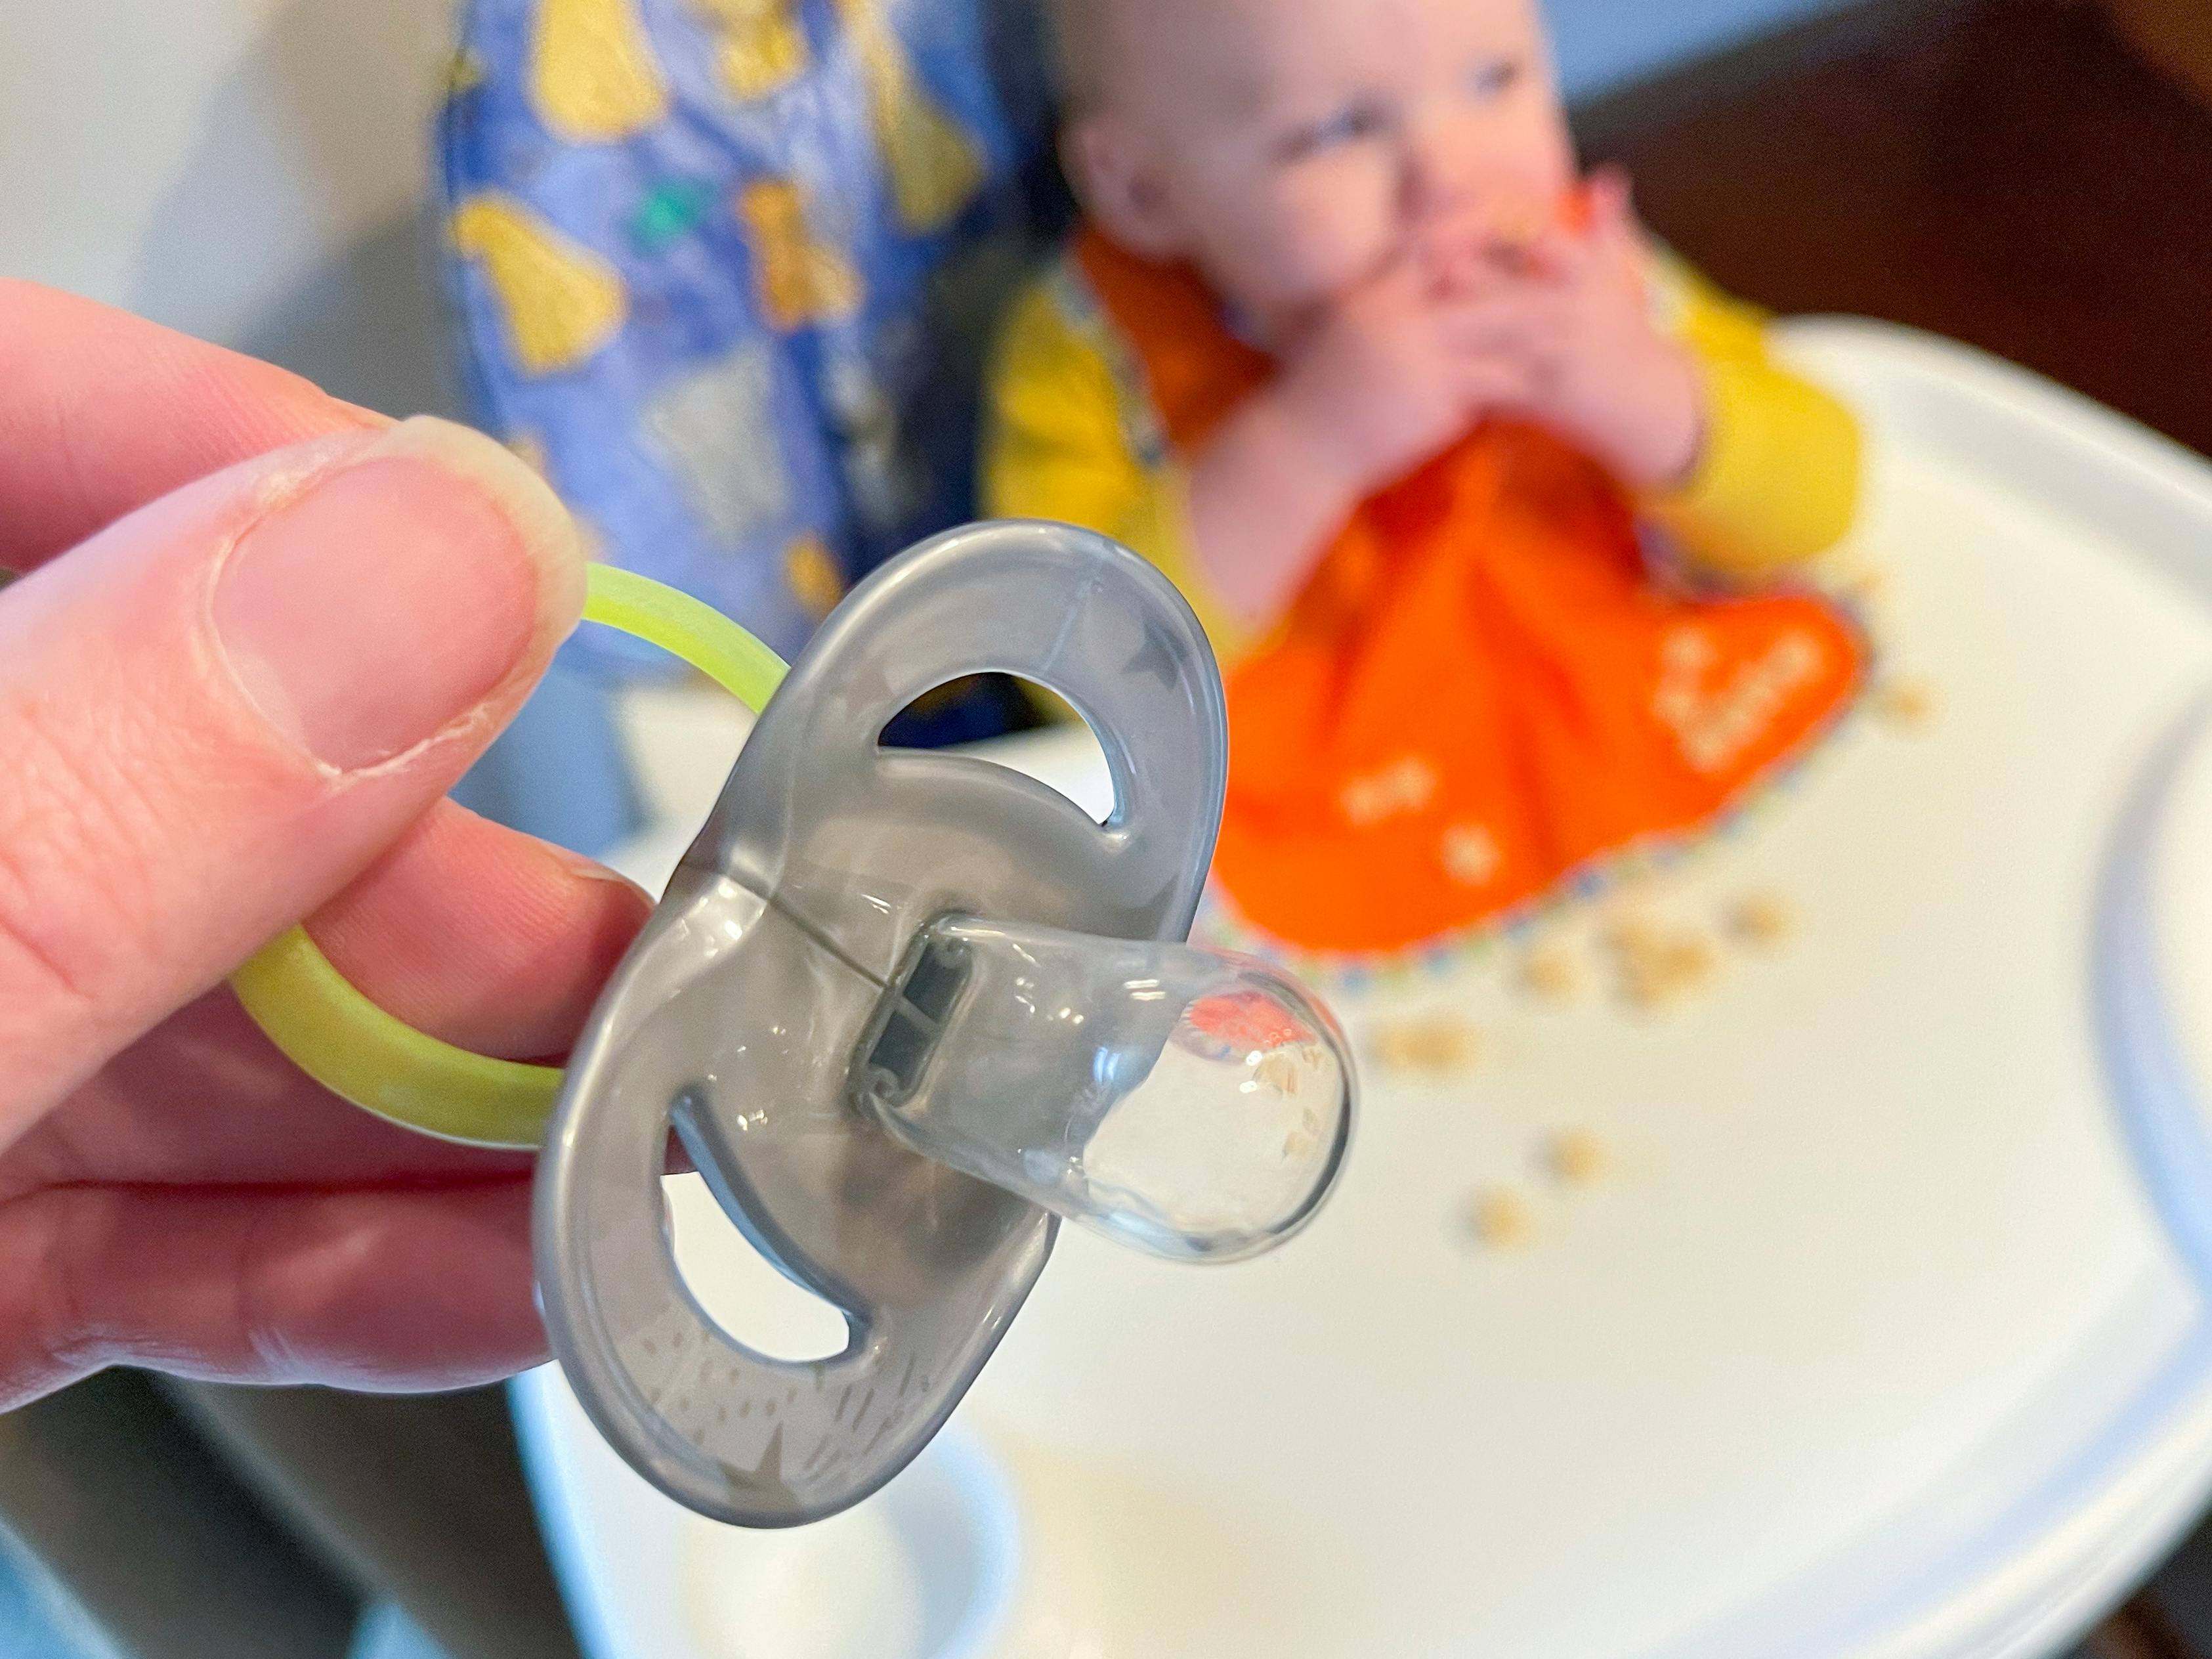 A pacifier in a persons hand with a baby in the background